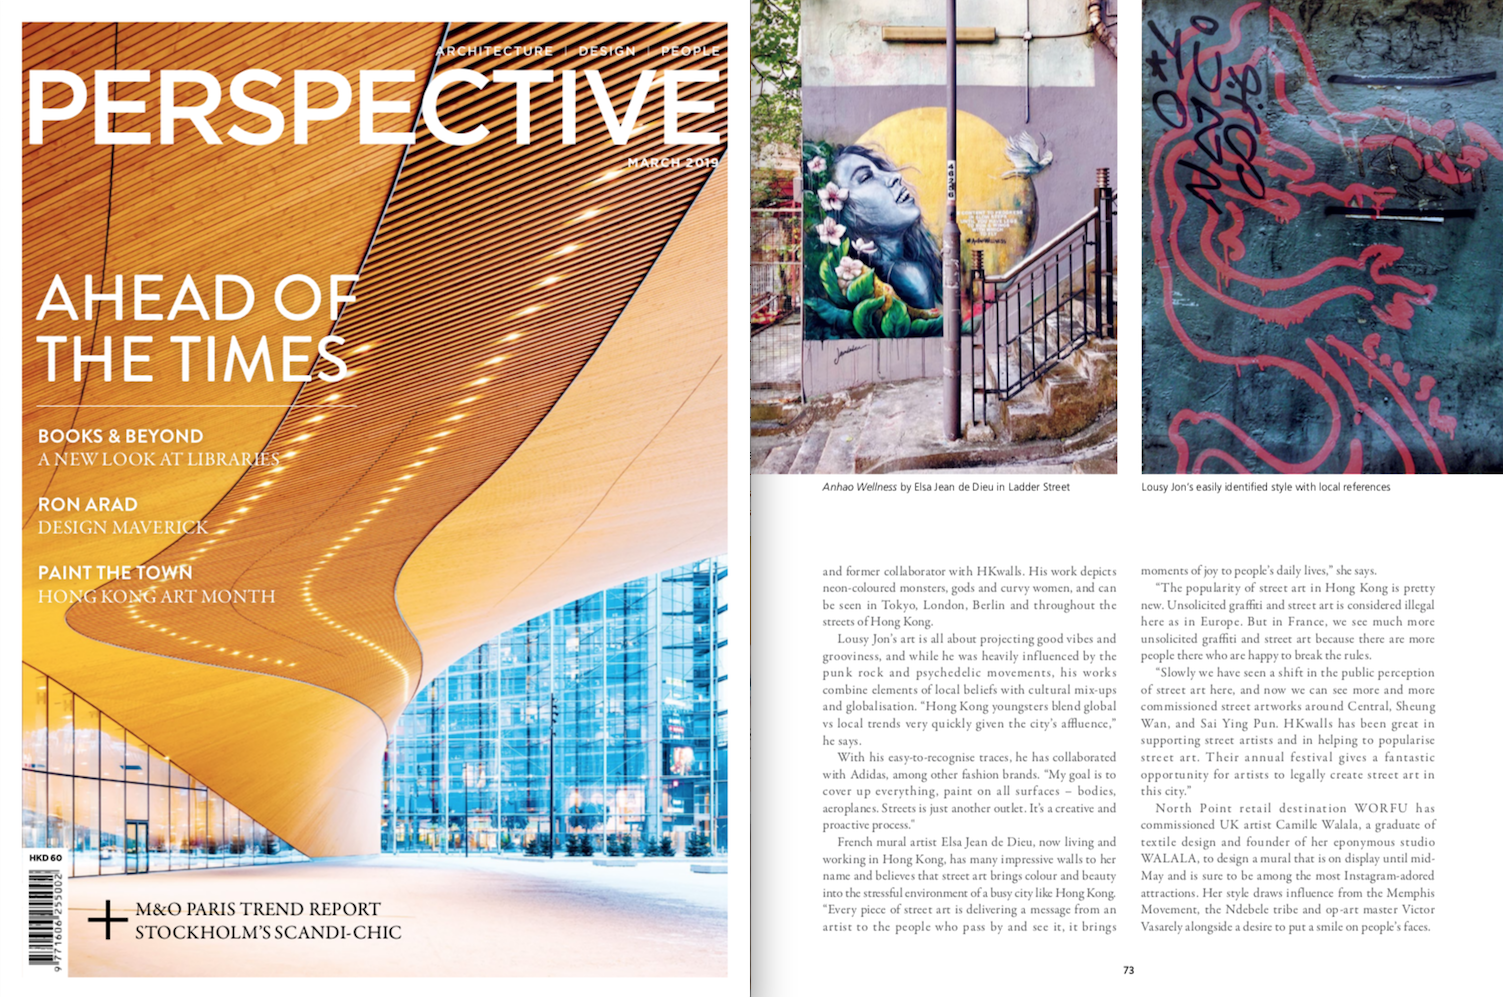 Perspective Magazine, March 2019